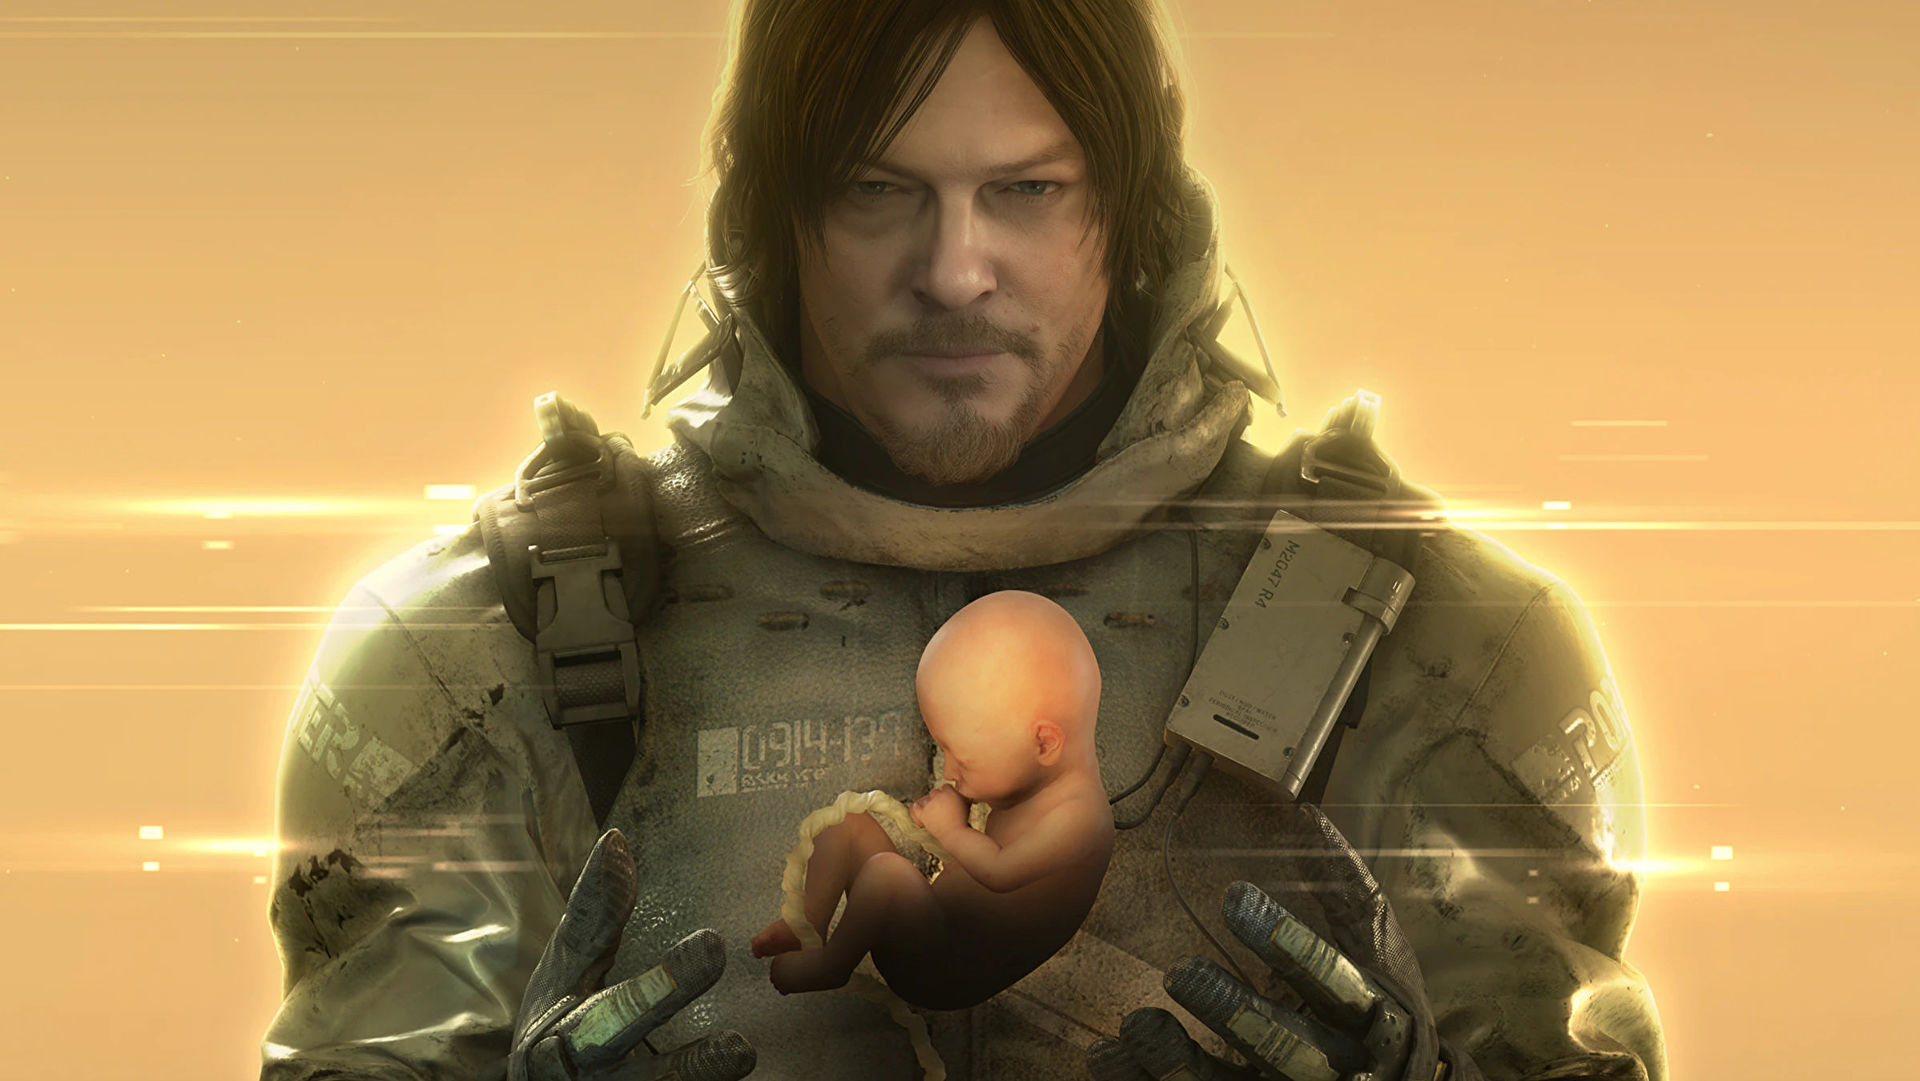 death-stranding-director's-cut-will-be-a-$10-upgrade-if-you-own-the-original